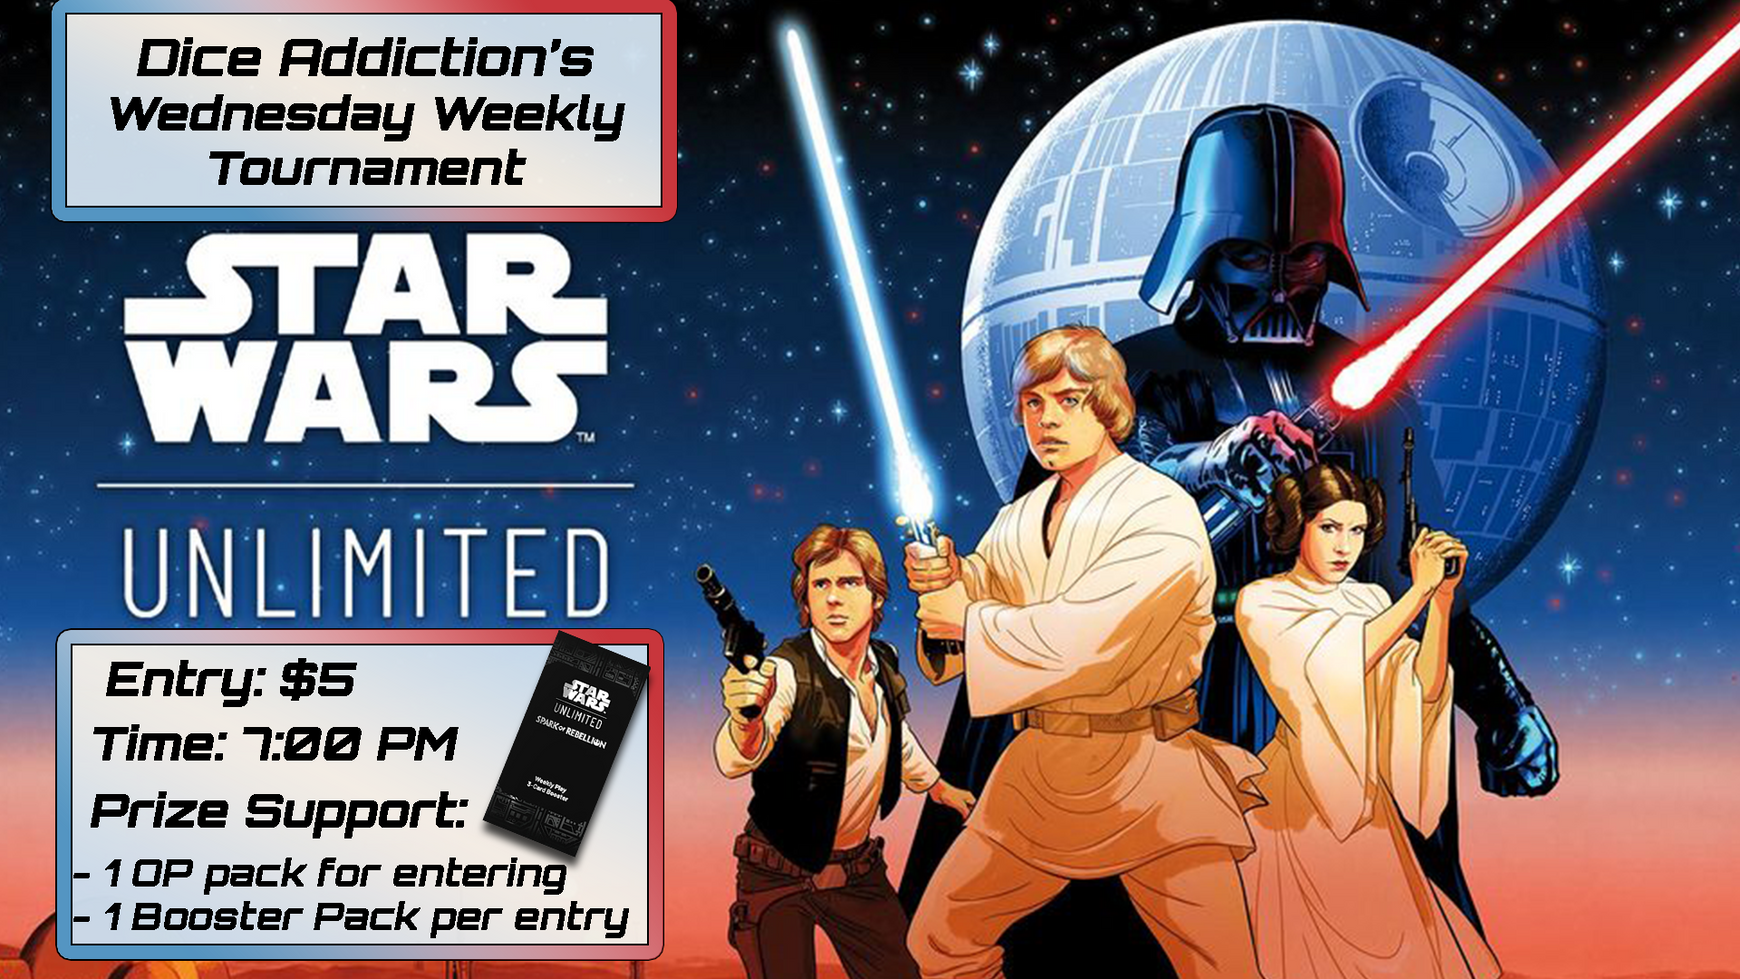 Star Wars Wednesday Night Weekly at Dice Addiction